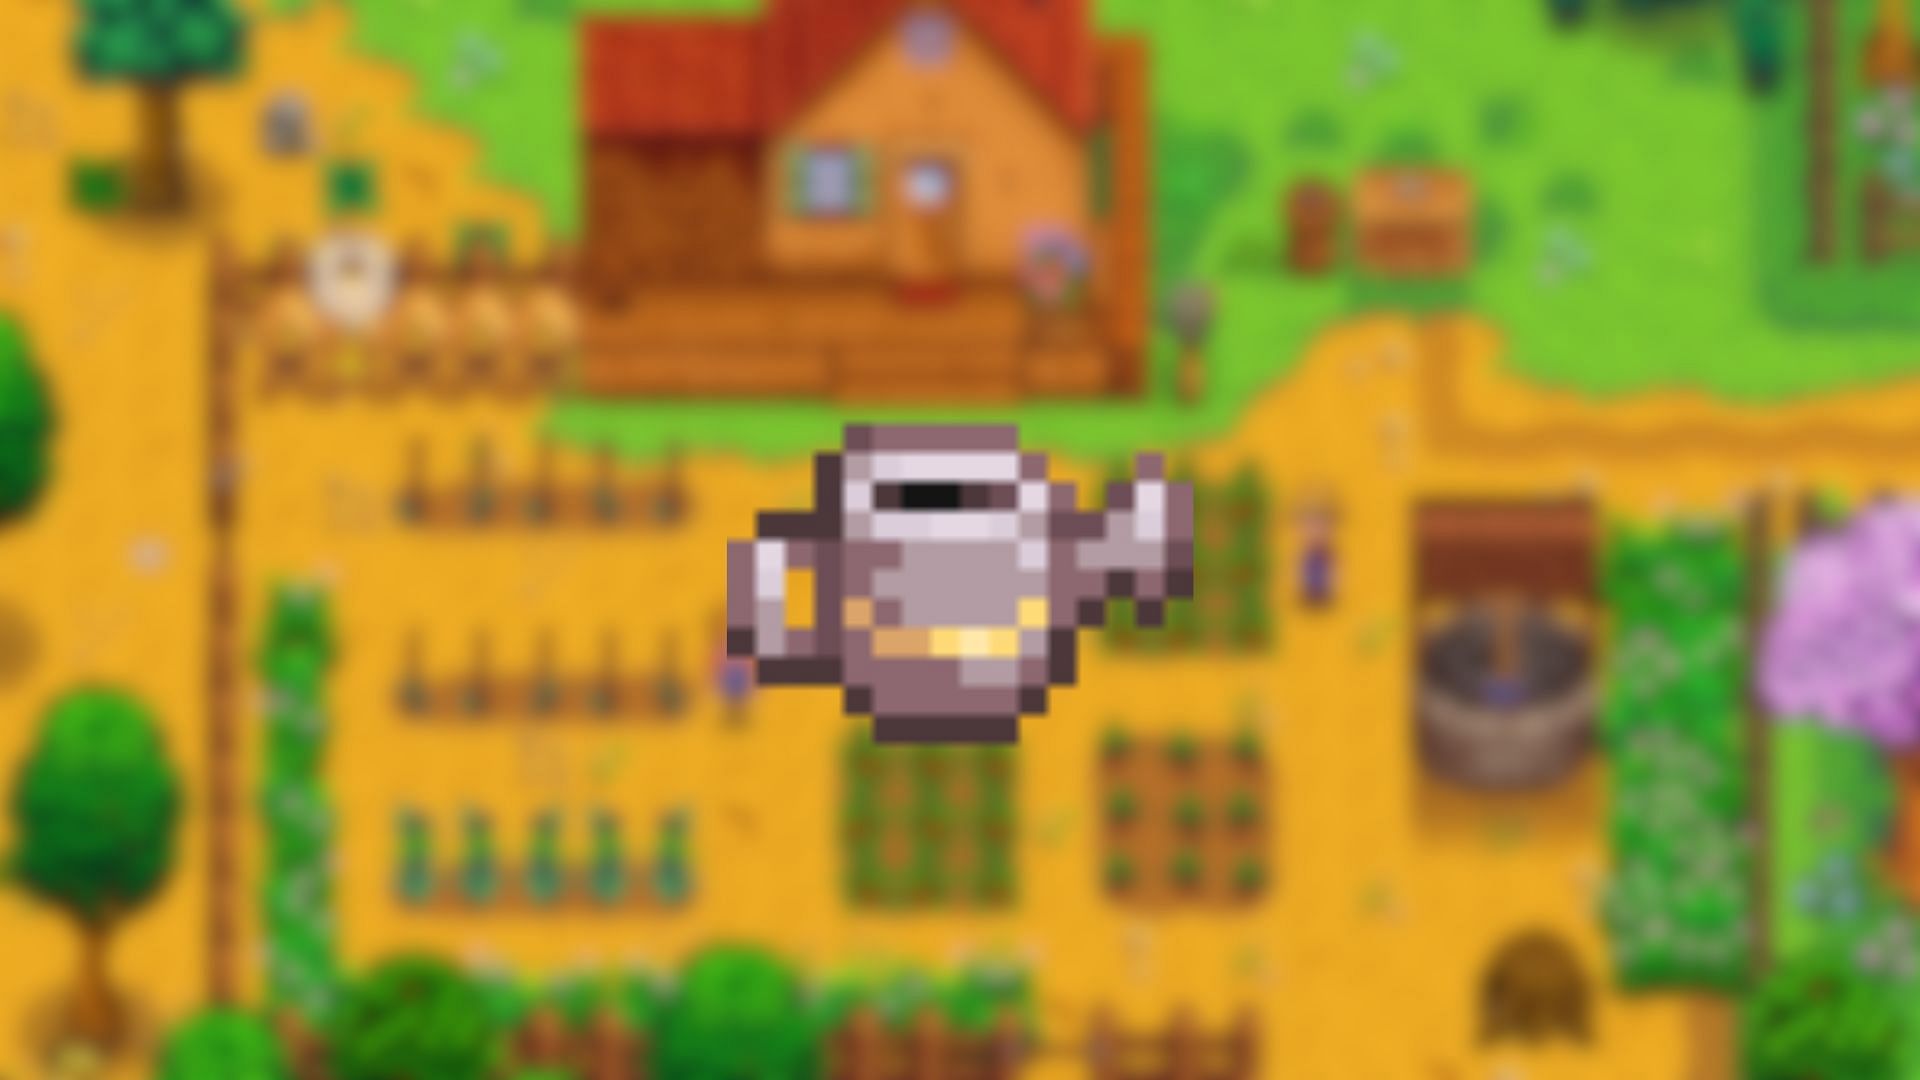 Upgrading Watering Can to a Steel Watering Can can significantly boost your efficiency. (Image via ConcernedApe)